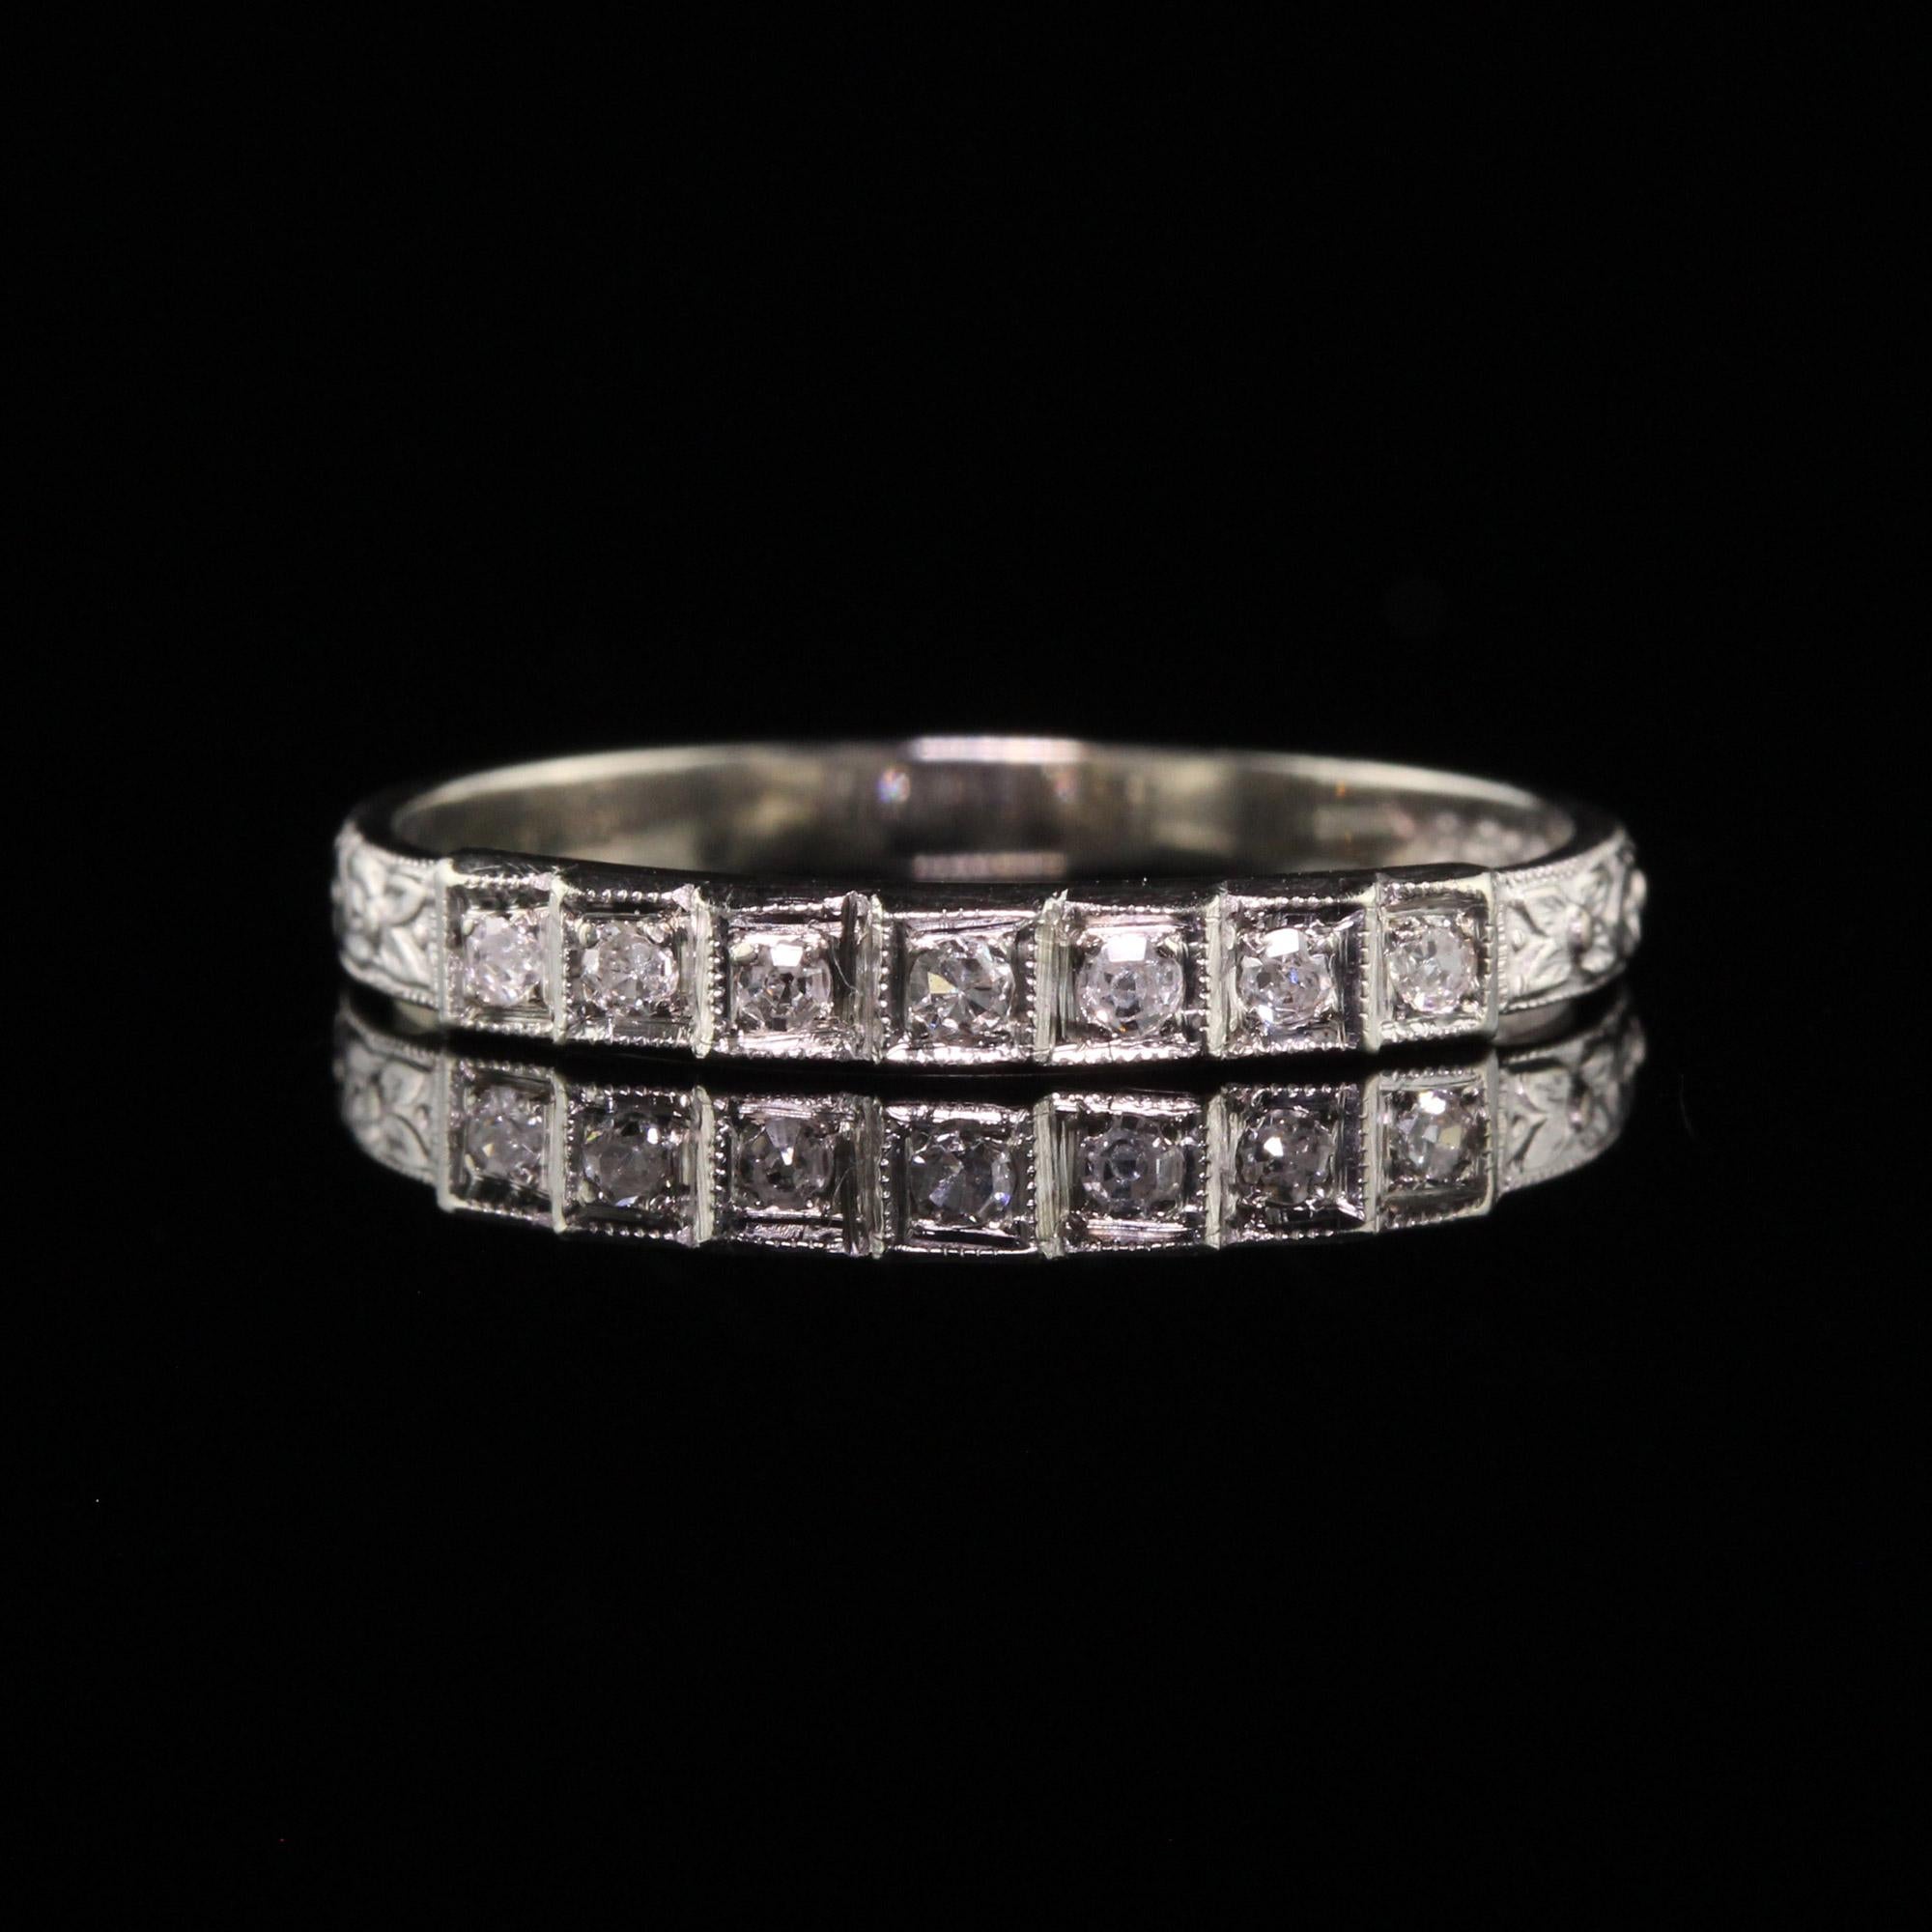 Antique Art Deco 18k White Gold Ring O Romance Diamond Wedding Band In Good Condition For Sale In Great Neck, NY